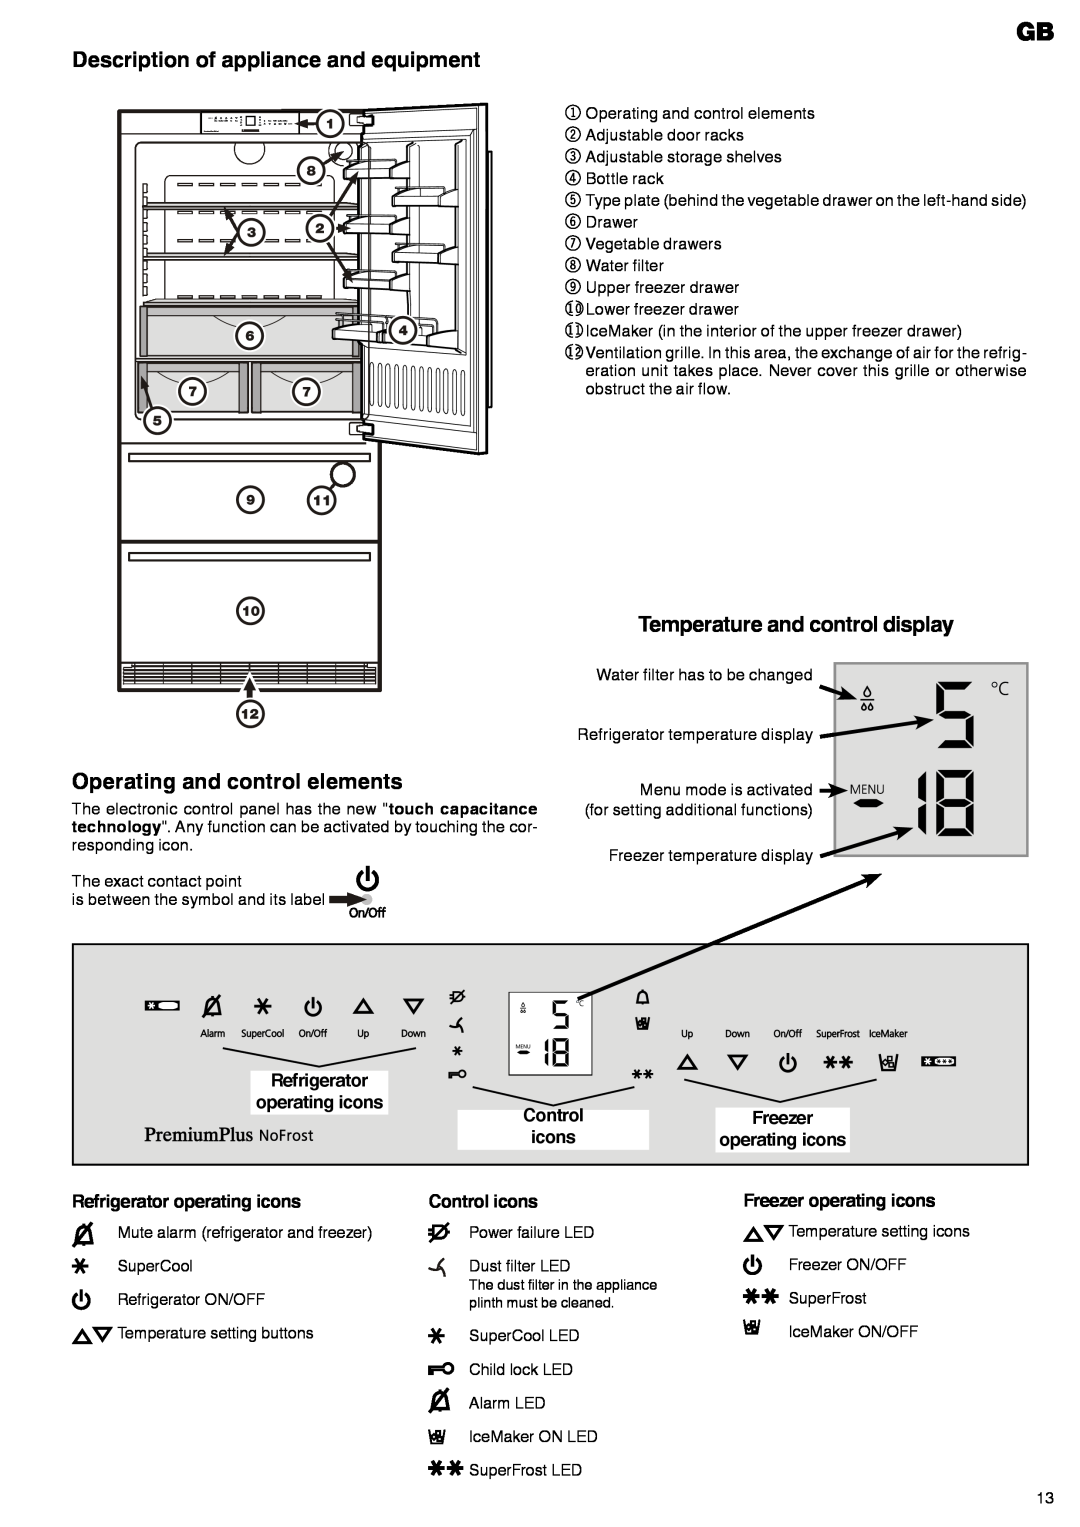 Liebherr 7082 135-00 Description of appliance and equipment Operating and control elements, Control icons, Freezer 